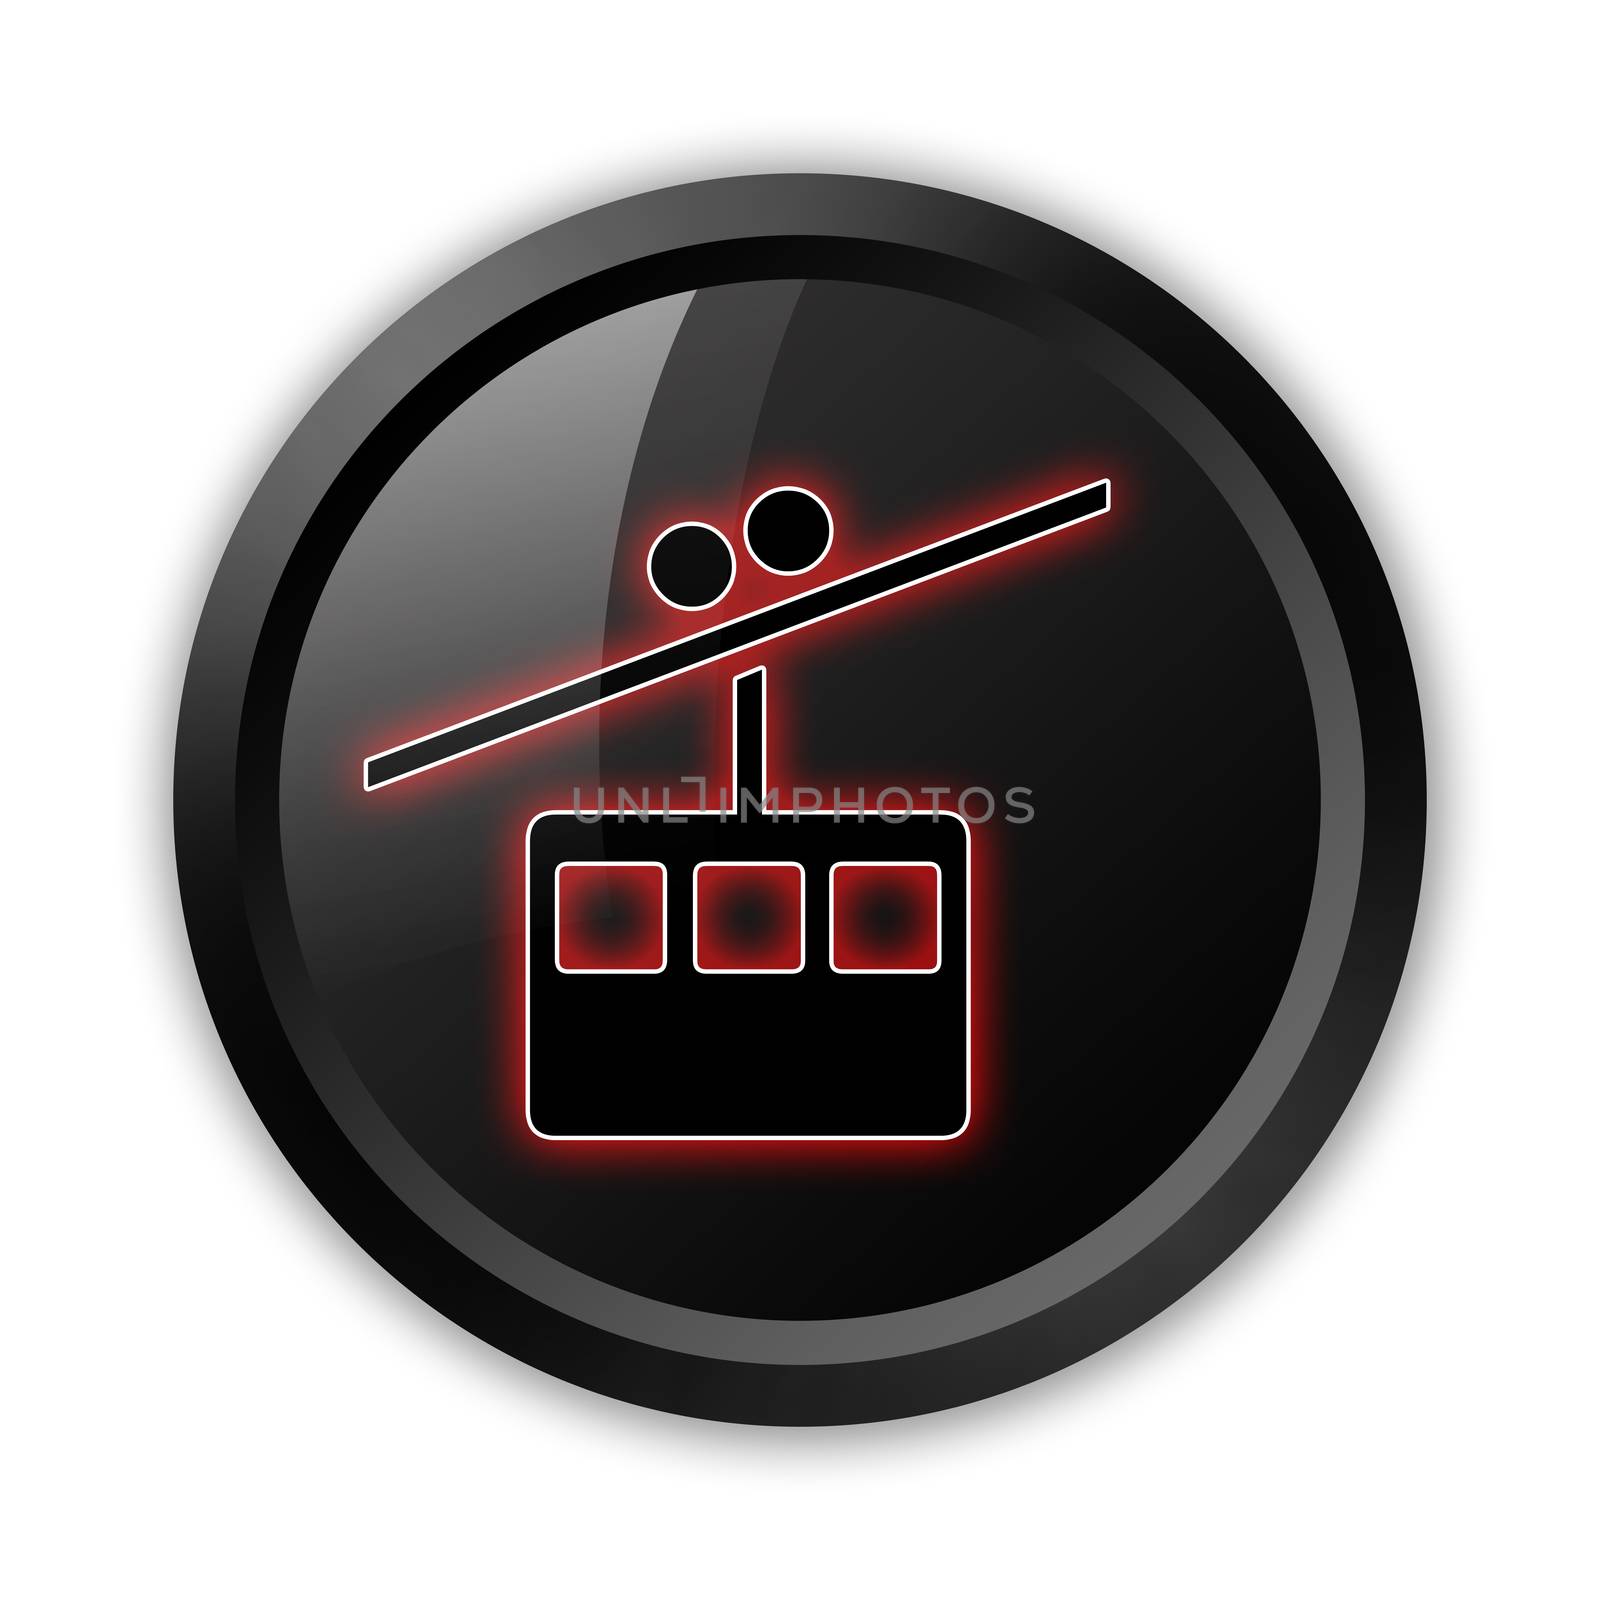 Icon, Button, Pictogram Aerial Tramway by mindscanner